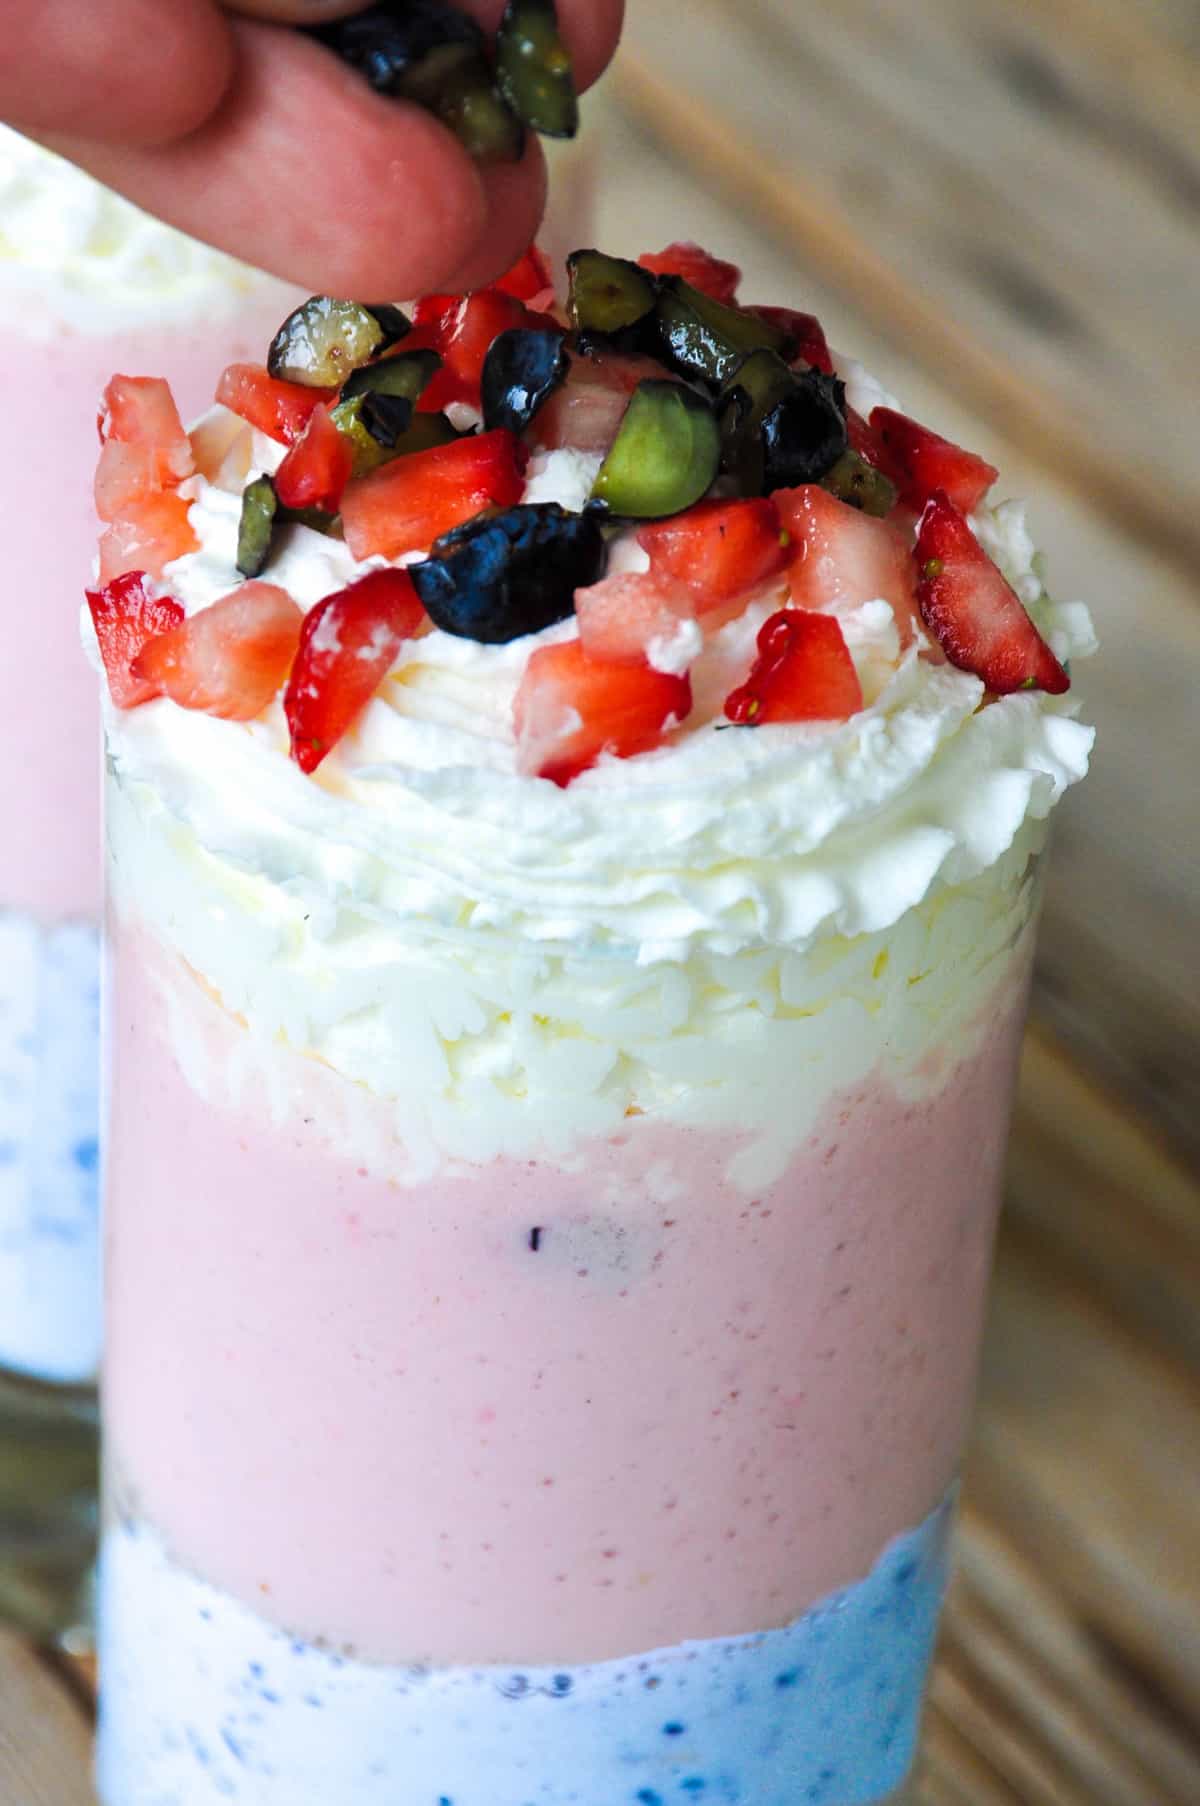 Unicorn smoothie with whipped cream topped with blueberries and strawberries